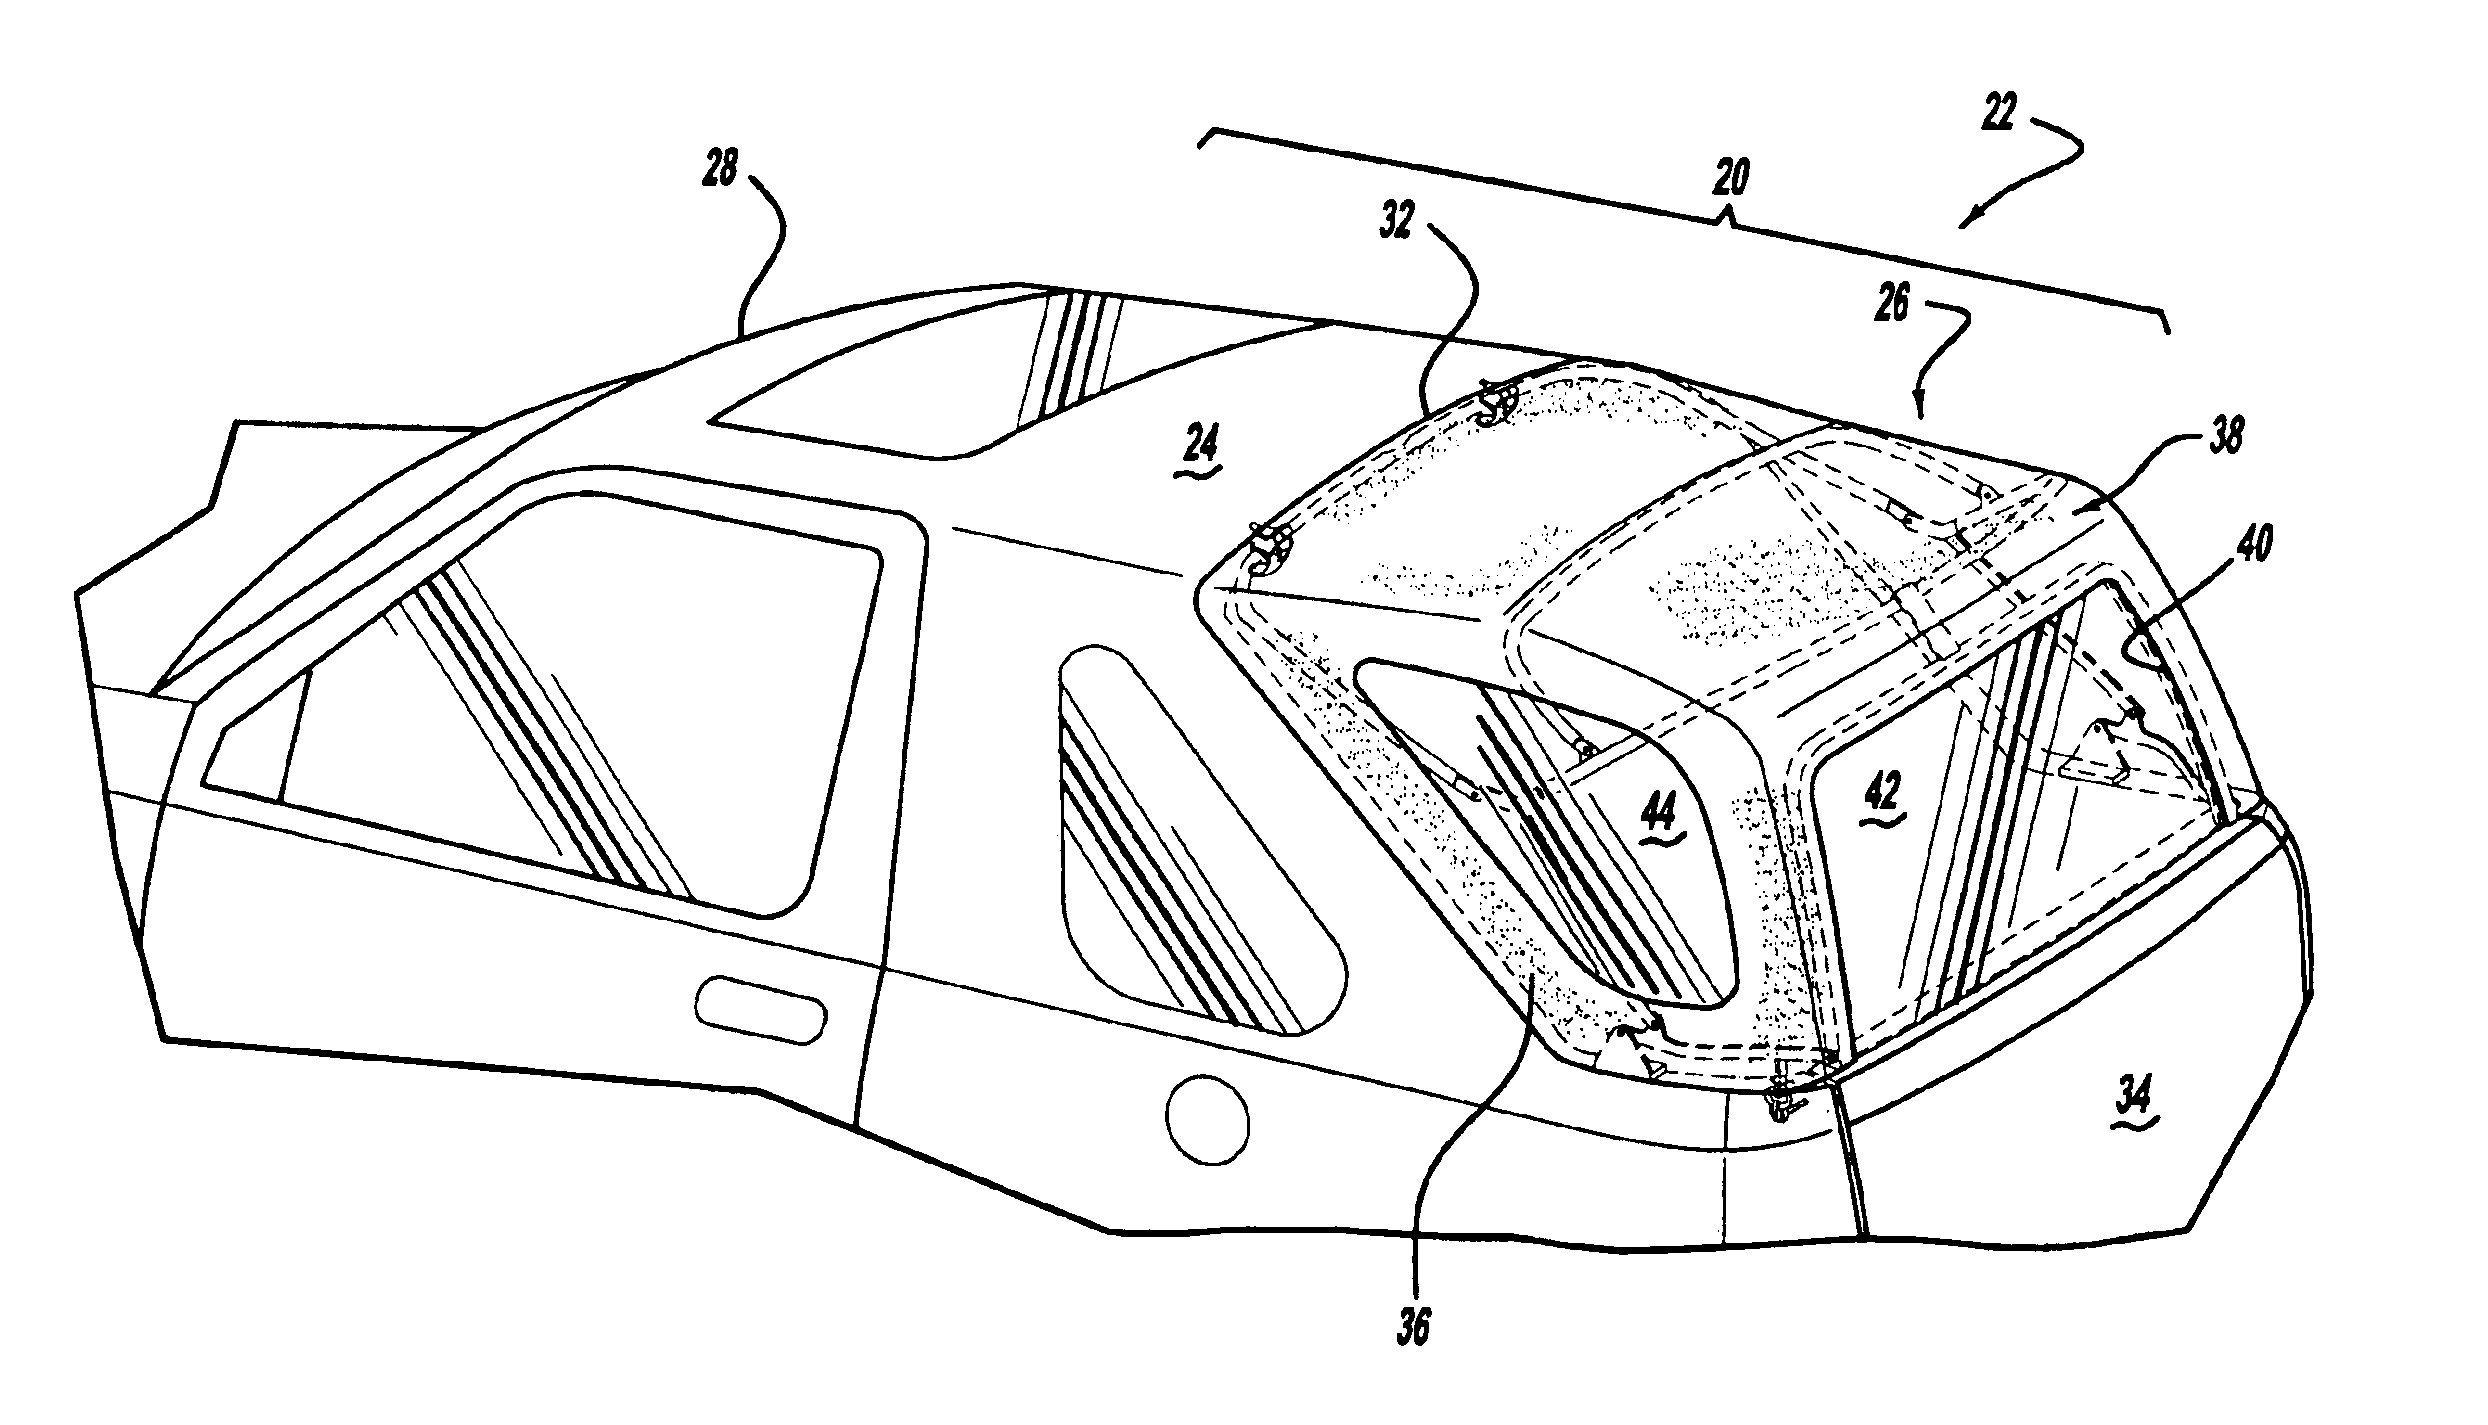 Automotive vehicle roof system having a detachable convertible roof